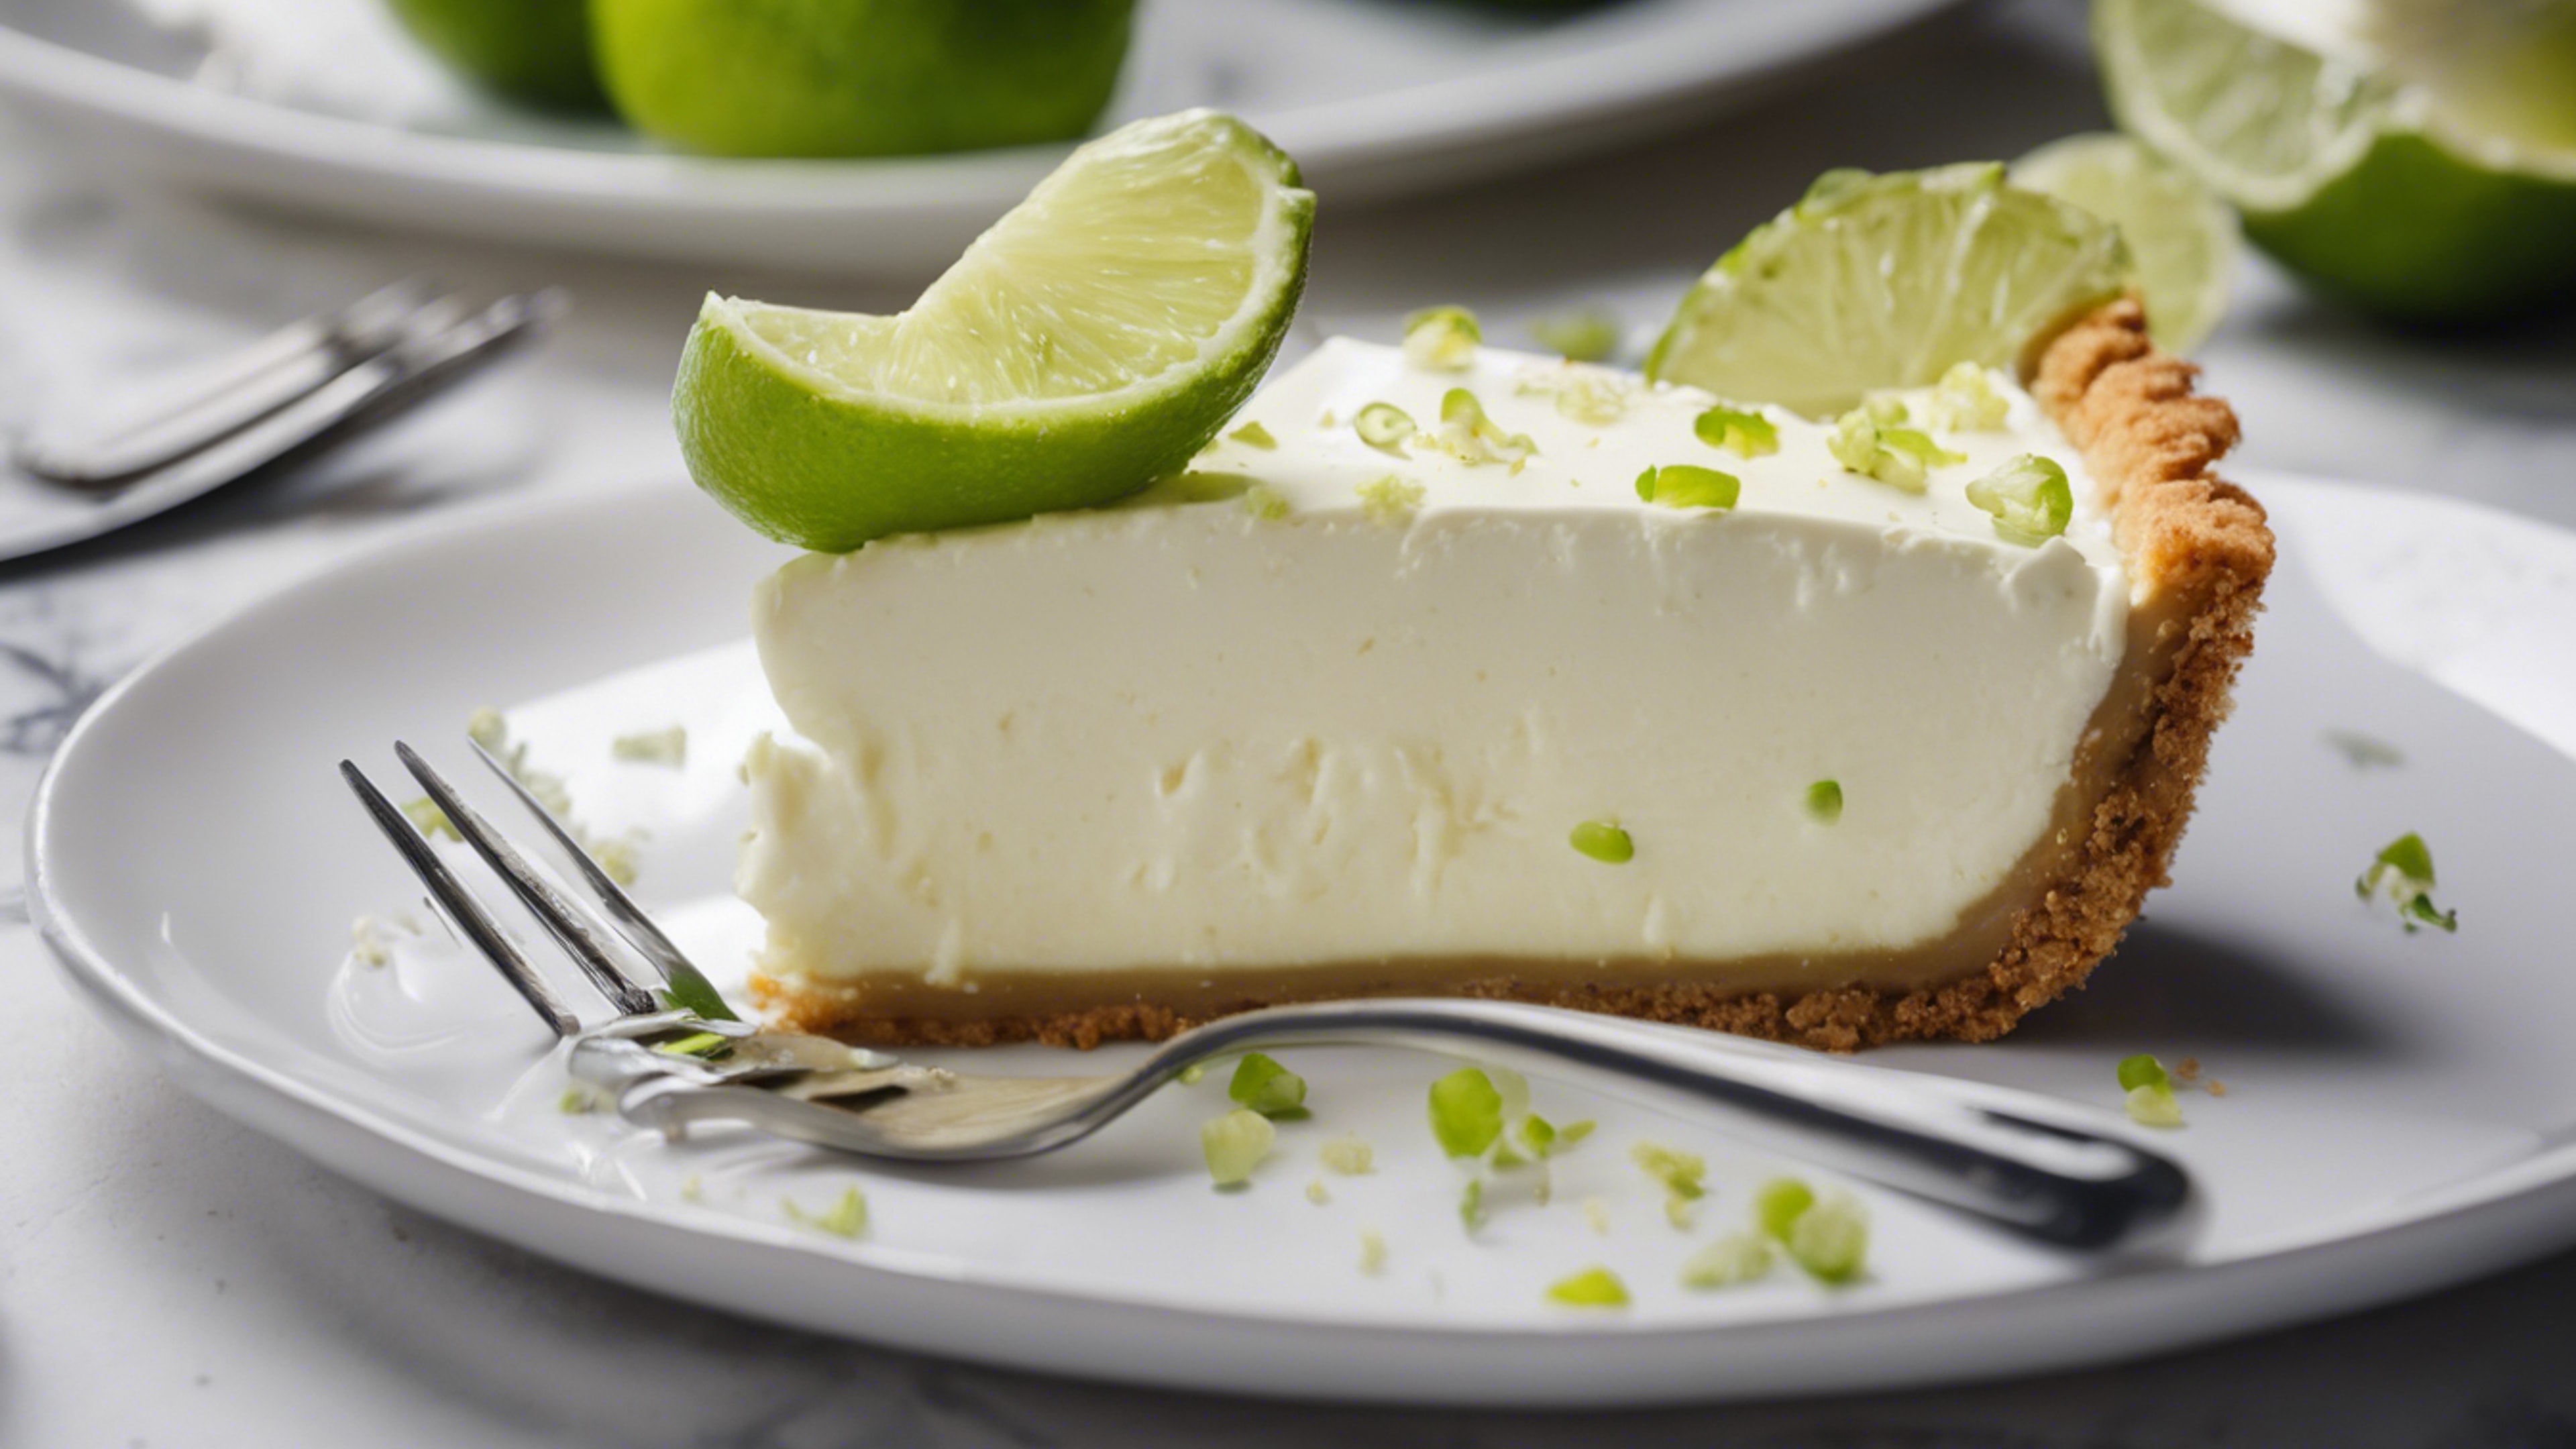 Delicious key lime pie served on a white ceramic plate with a silver fork. Hình nền[dc9d1e1923f243919b66]